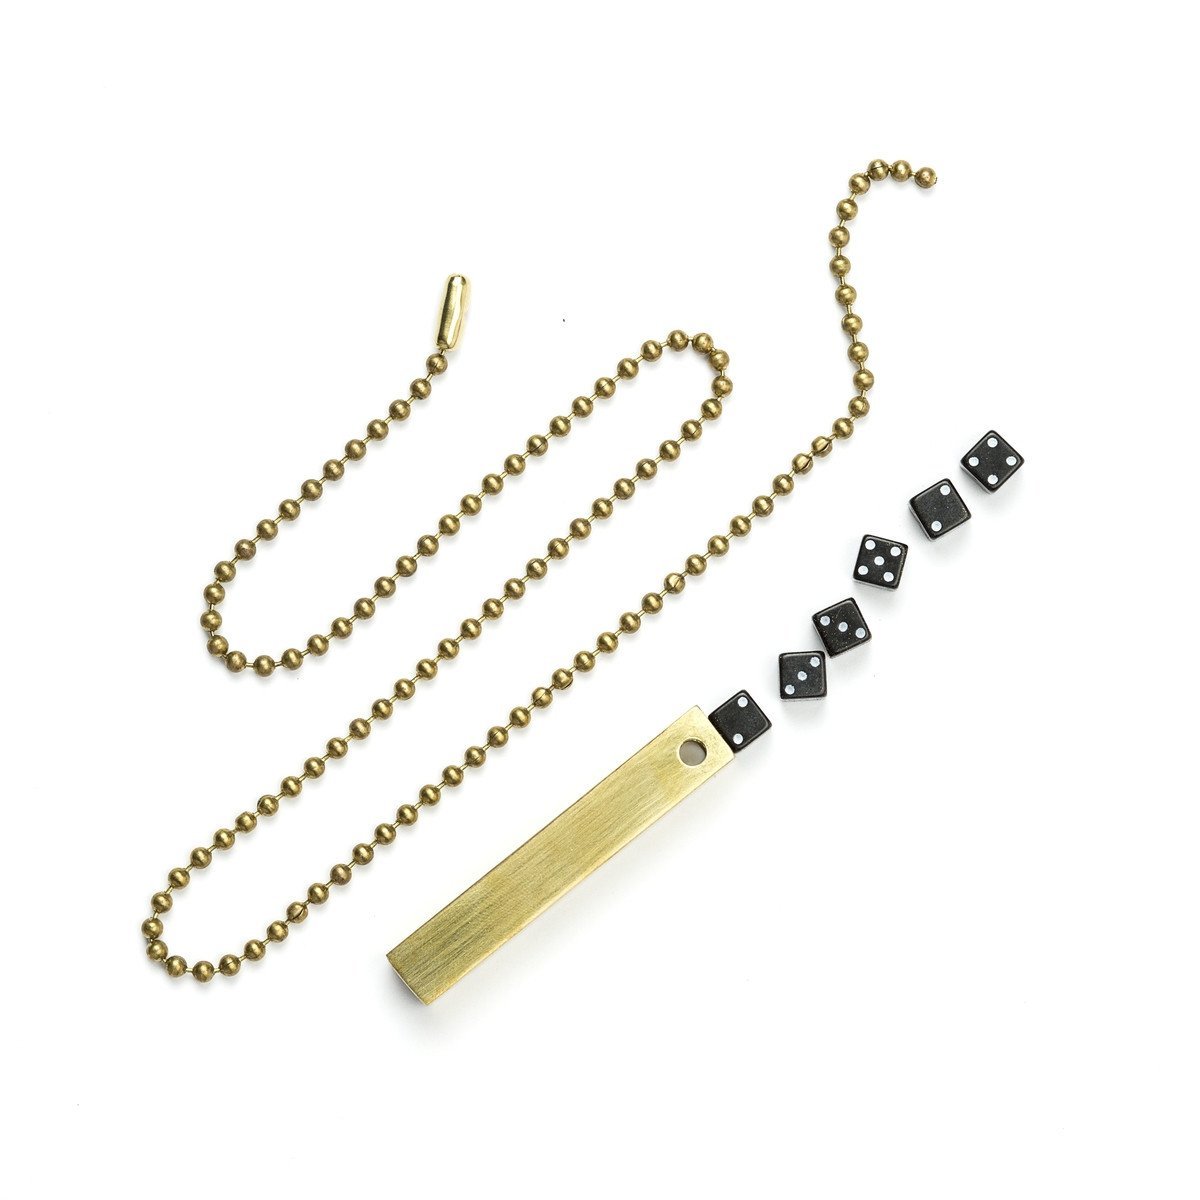 White background variant photo of brass travel dice with black dice and a necklace chain